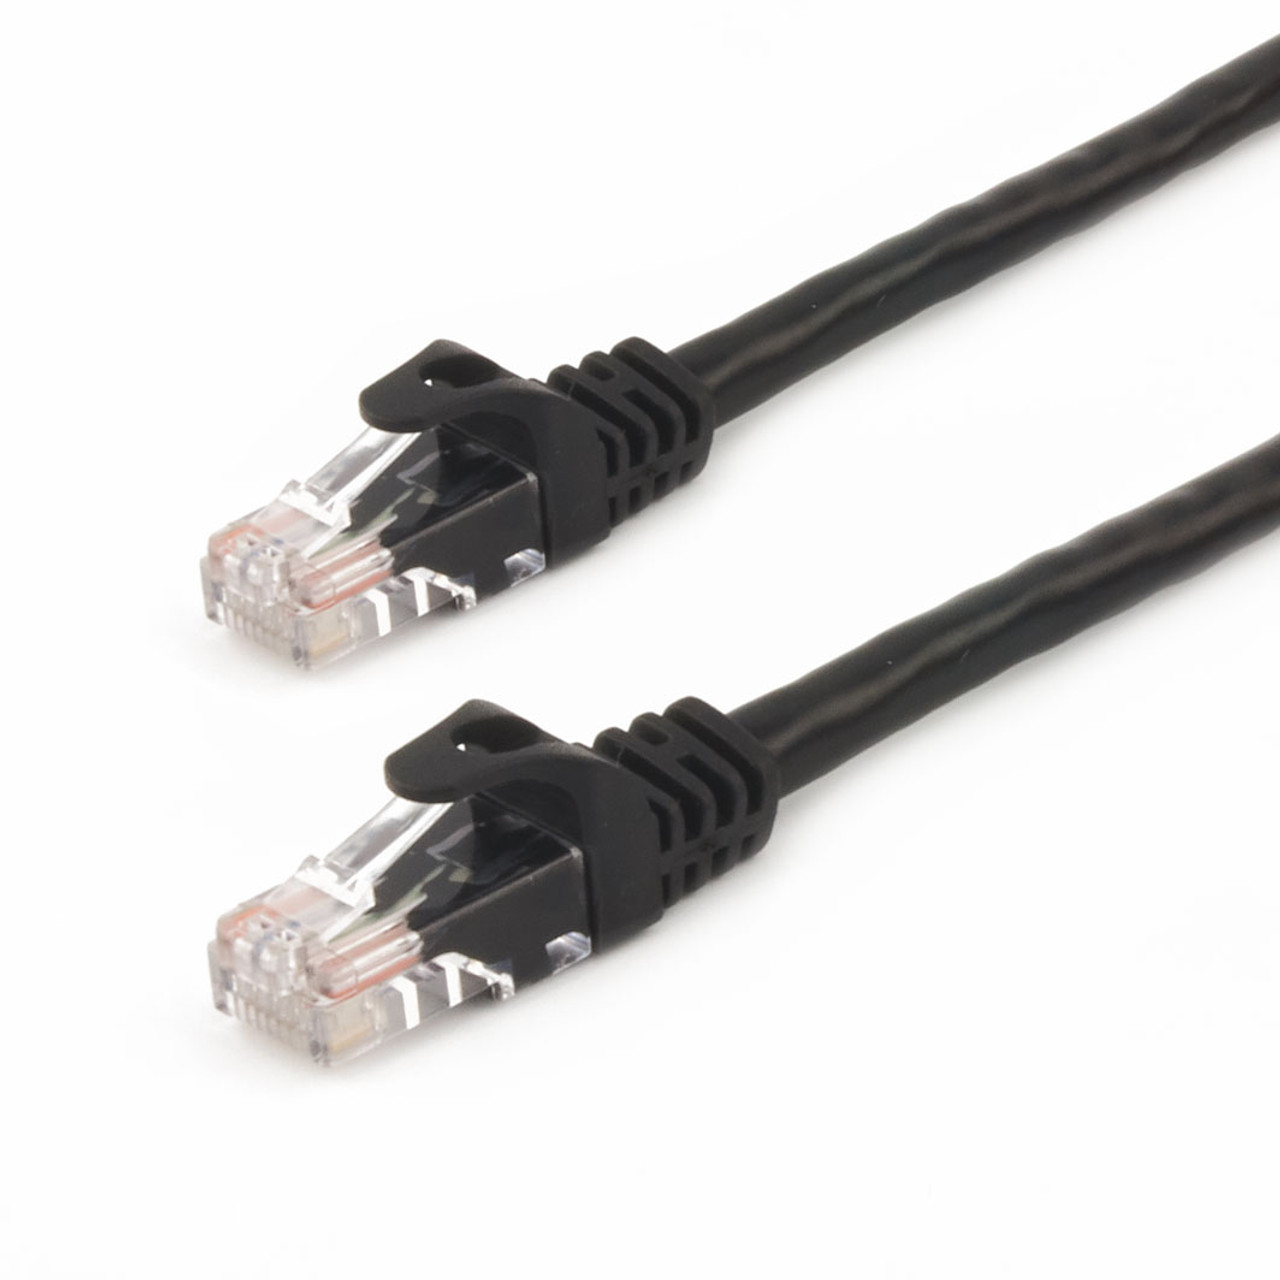 Cat6 Ethernet Patch Cable UTP 550Mhz 24awg 30ft